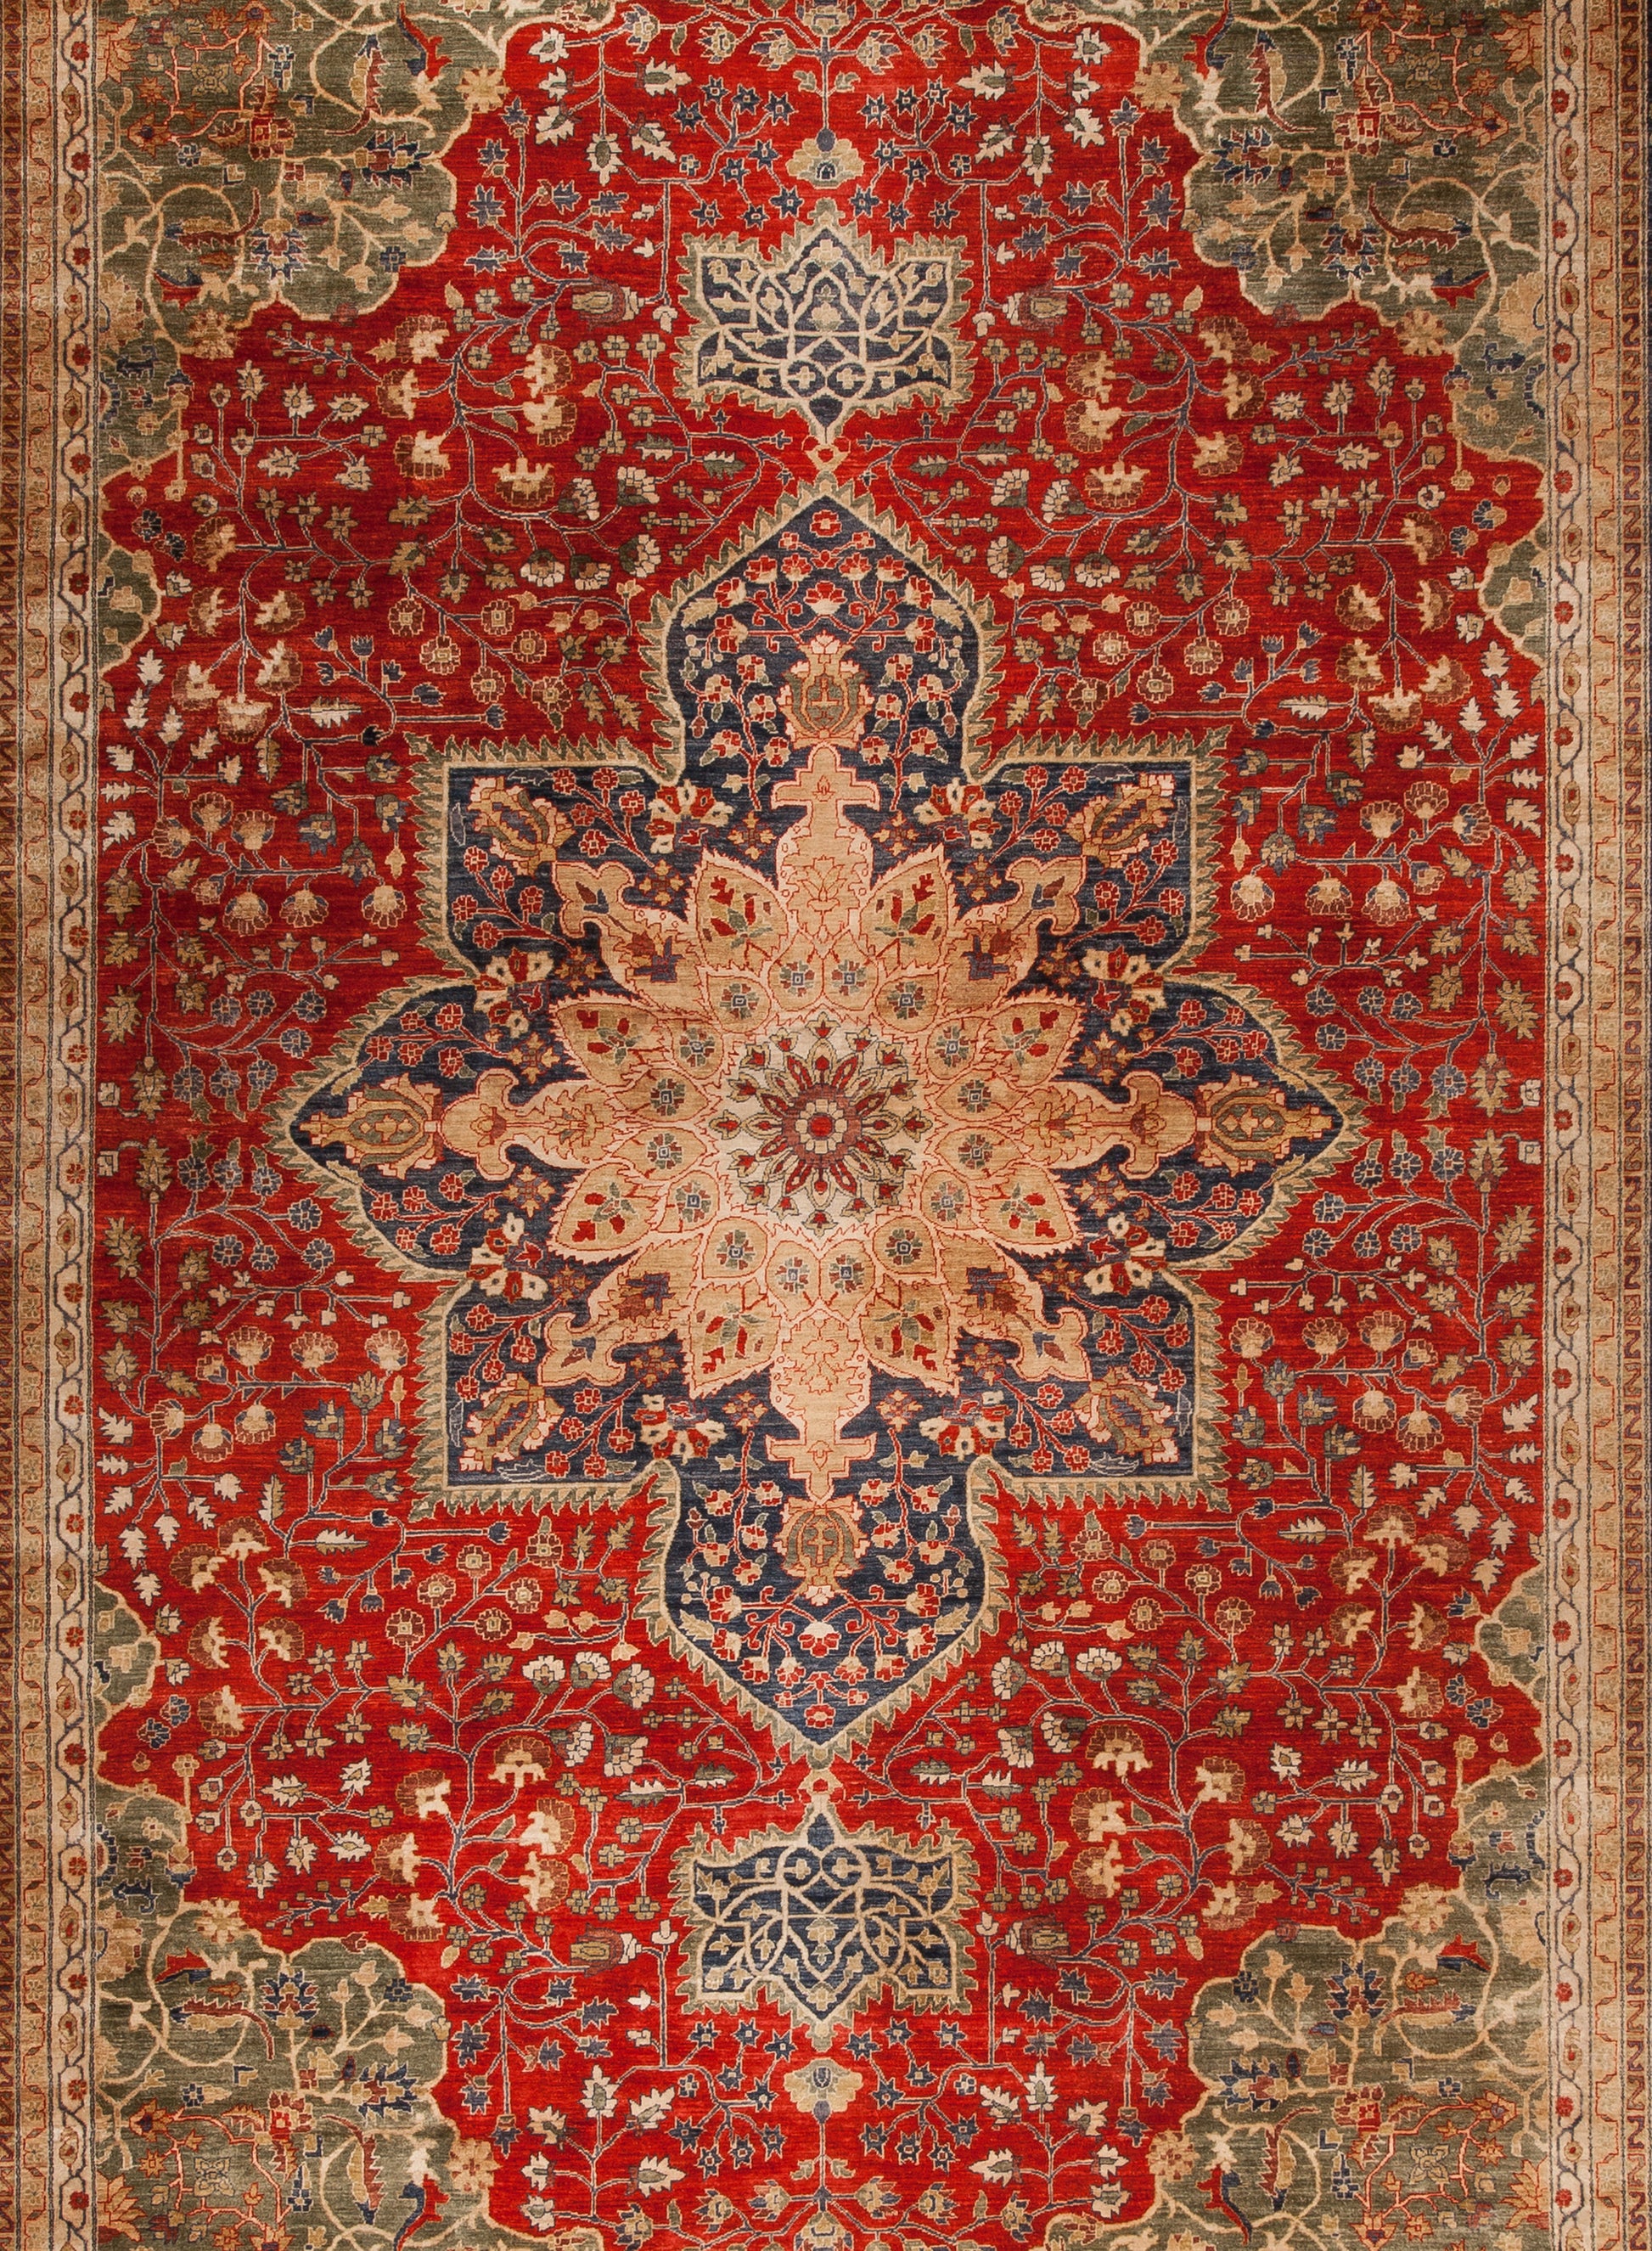 Finally, the center of the rug features a blue mandala that contains a yellow nested one.